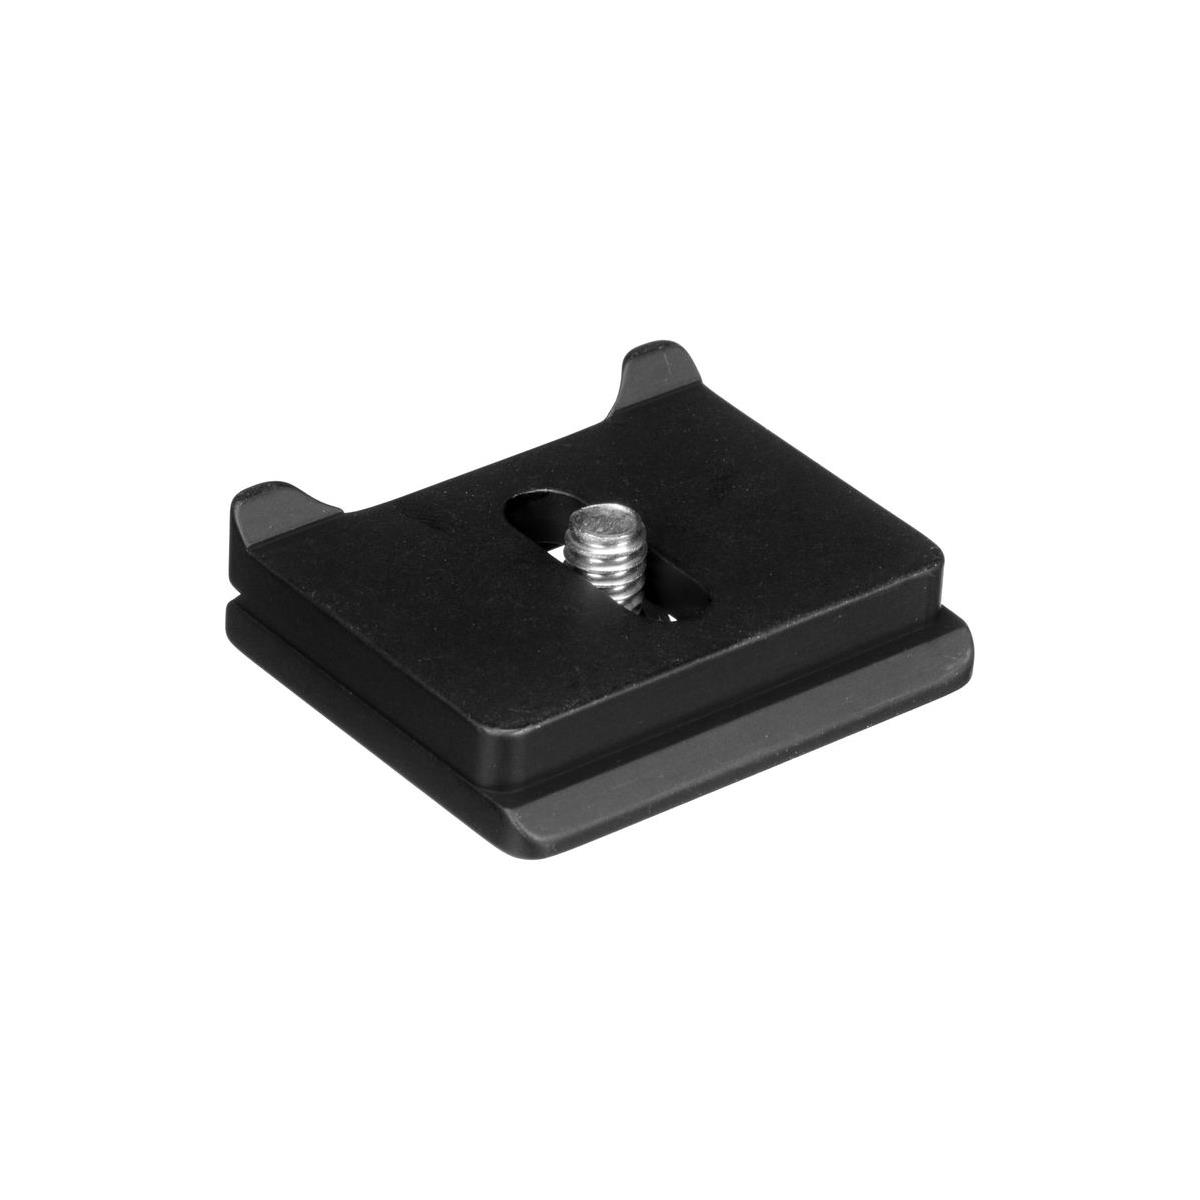 Image of Acratech Quick Release Plate for Canon SL1 Camera and Arca Swiss Type Clamp